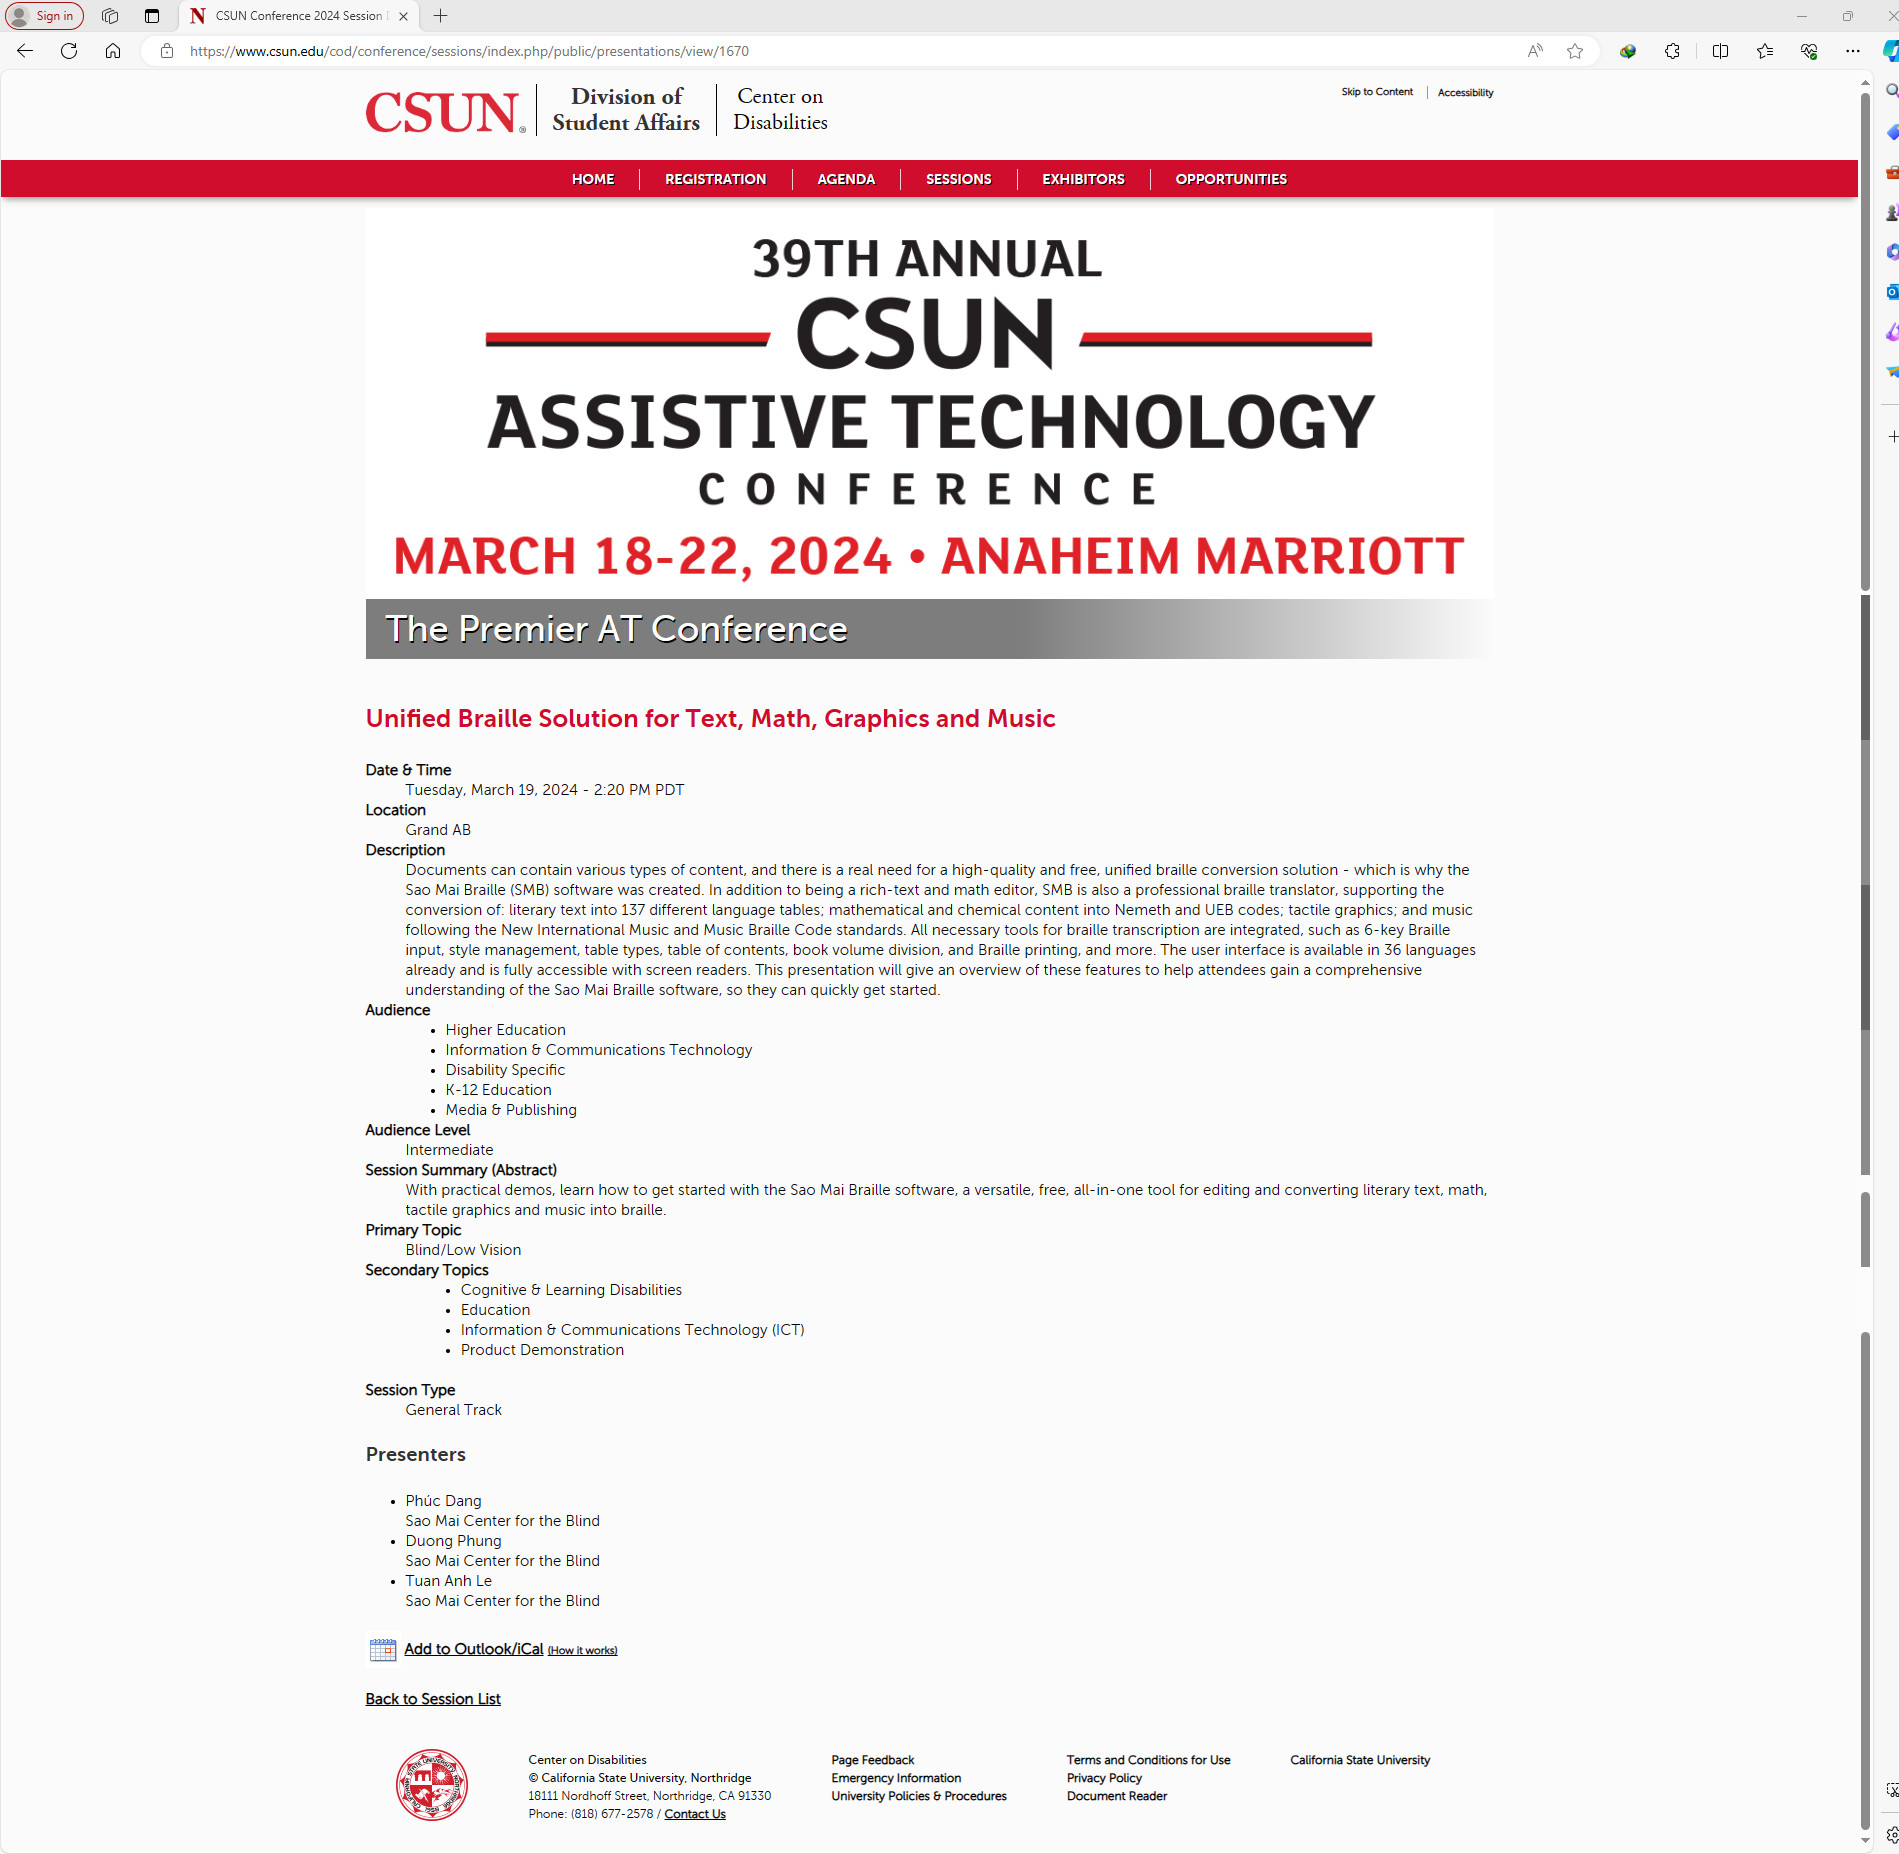 Details of SM Team's session at the CSUN 2024 conference